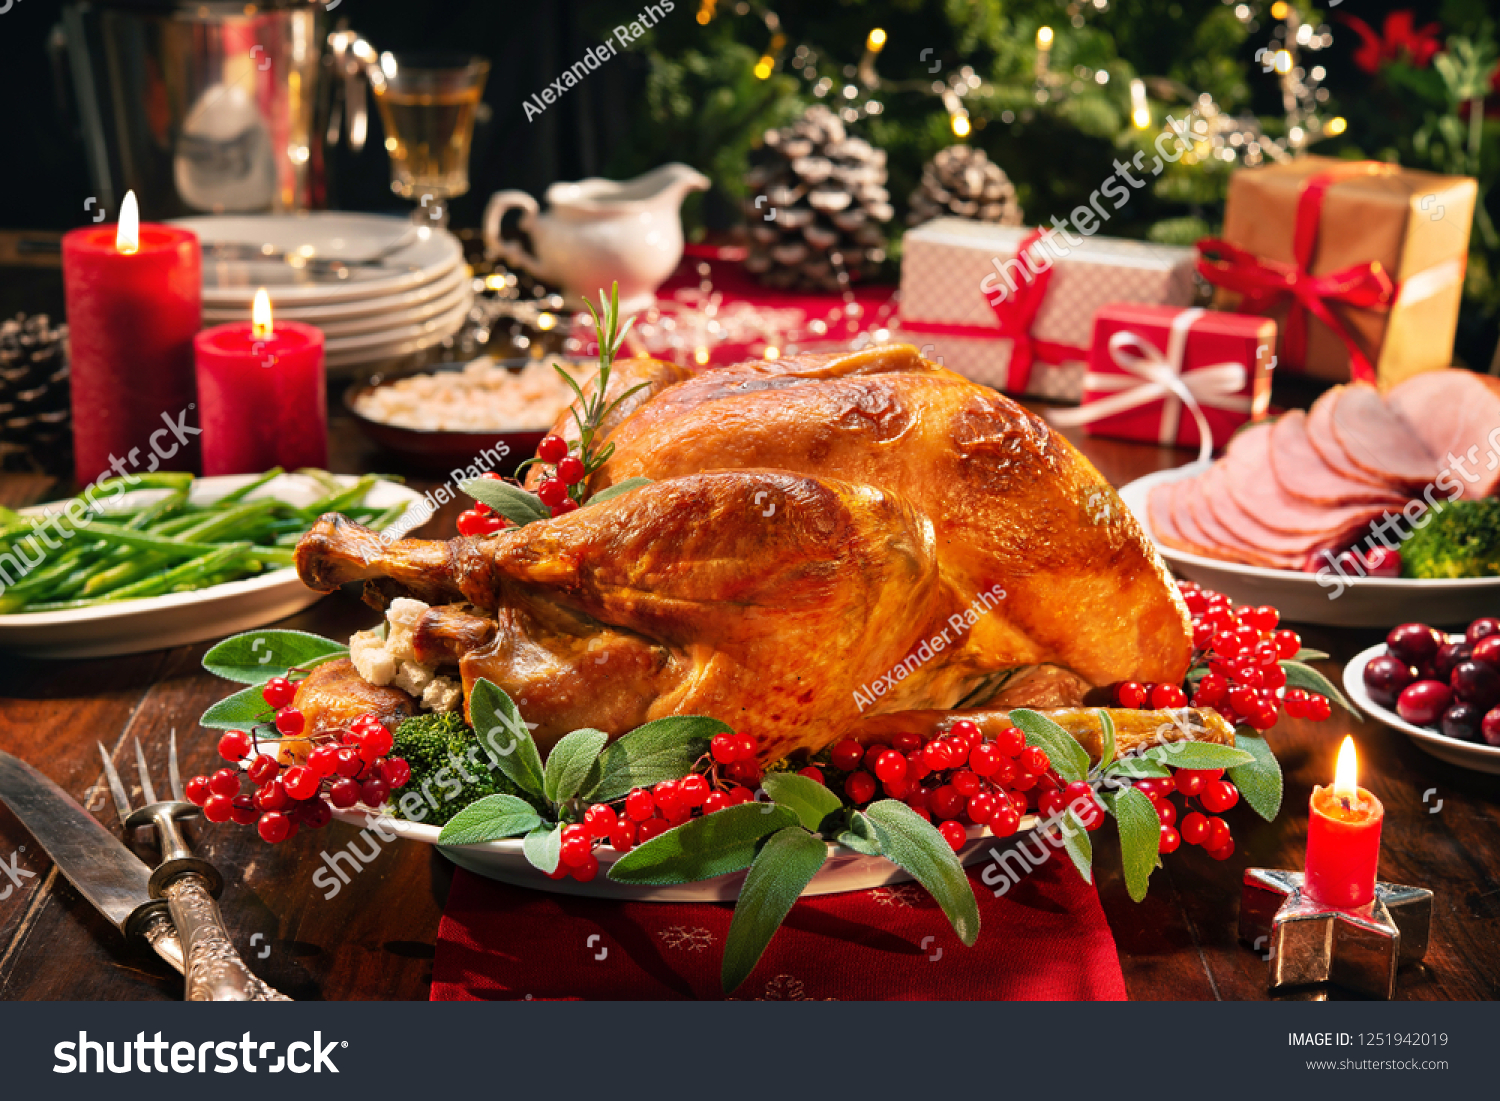 Christmas turkey dinner. Baked turkey garnished with red berries and sage leaves in front of Christmas tree and burning candles #1251942019